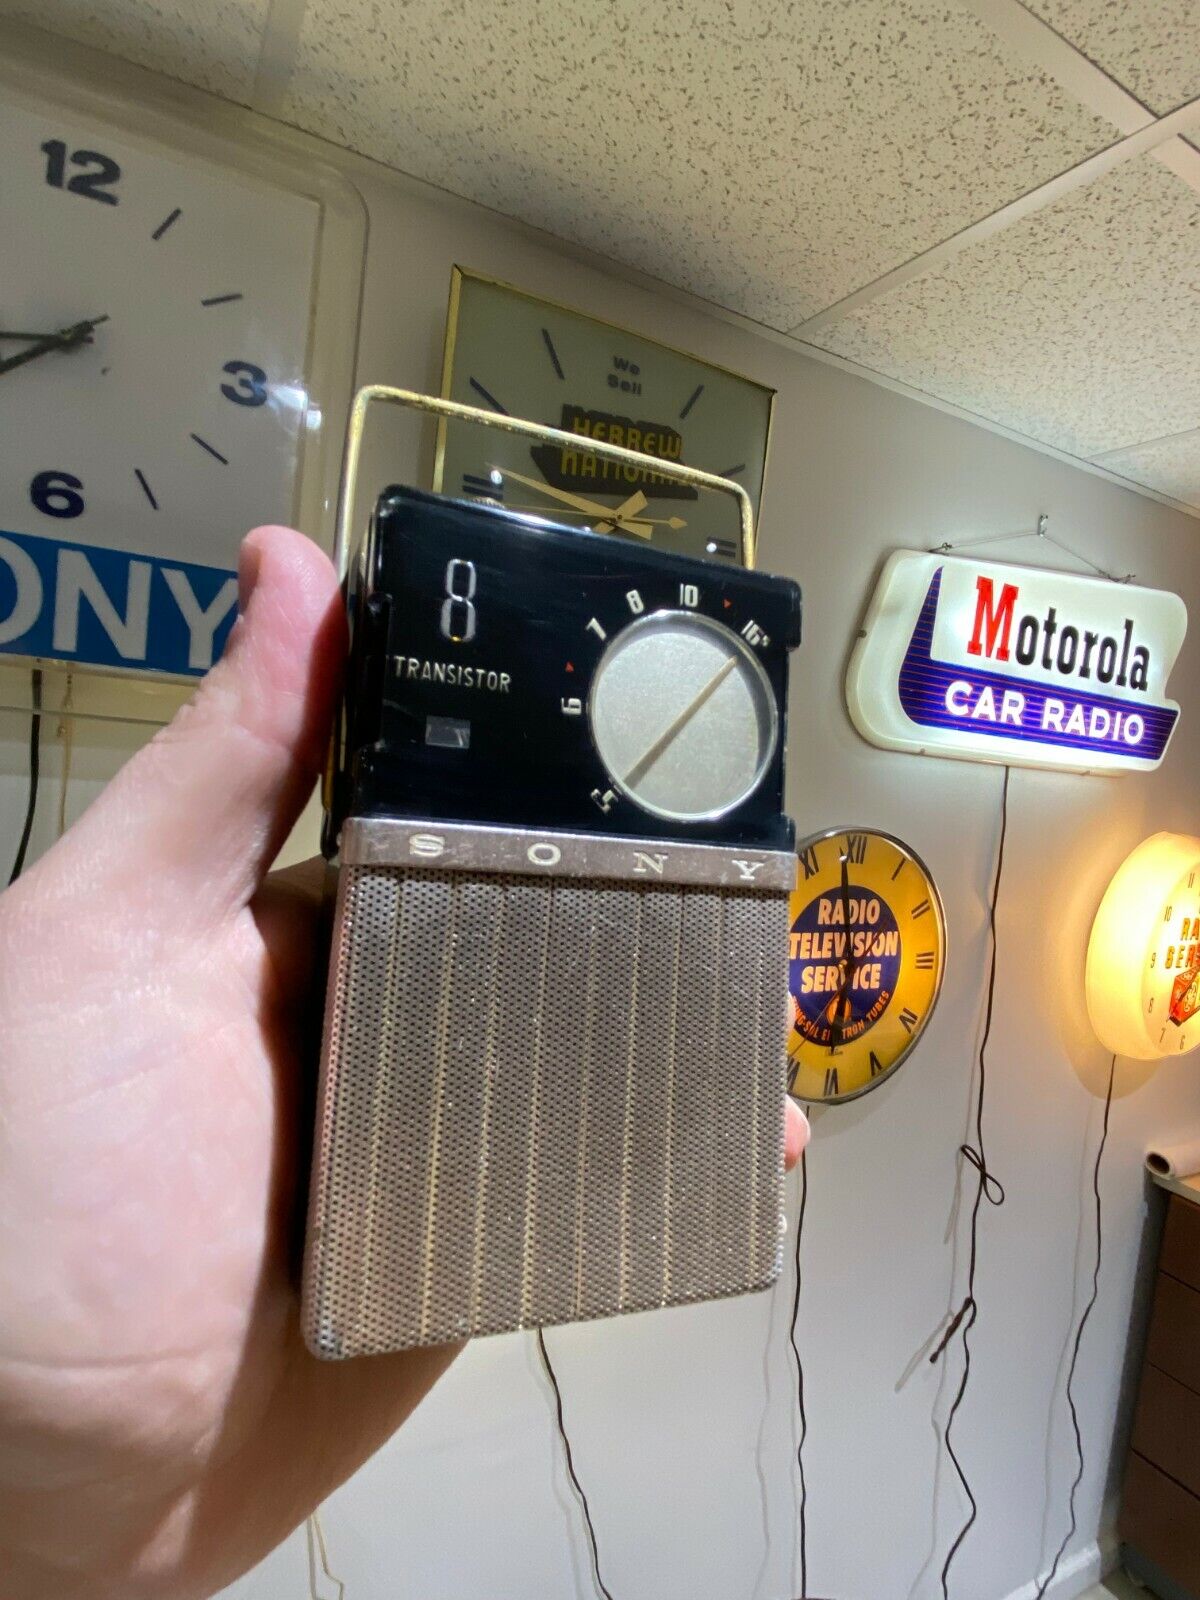  1958 SONY TR-86 IN BLACK TRANSISTOR RADIO LOW PRICE SPRING SALE SEE OTHERS